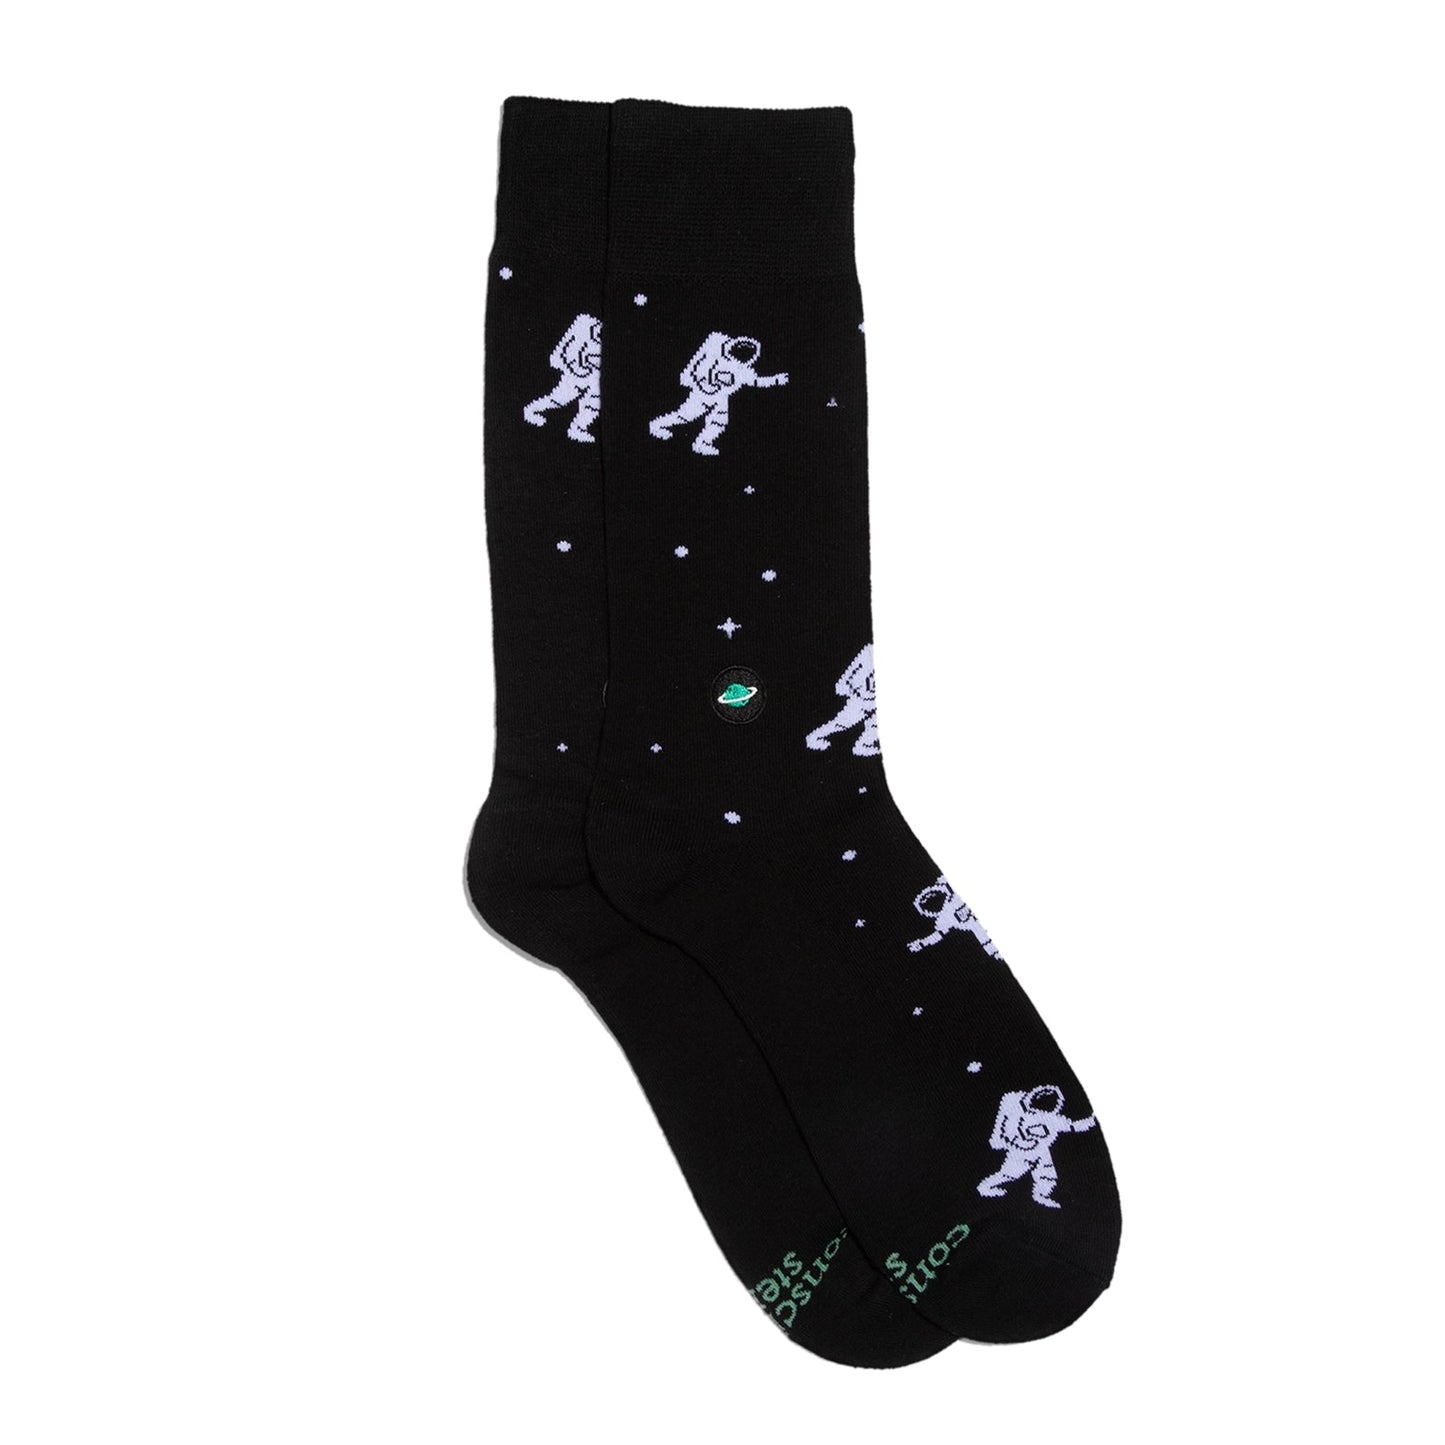 Men's Floating Astronaut Socks That Support Space Exploration | Fair Trade | Fits Men's Sizes 8.5-13